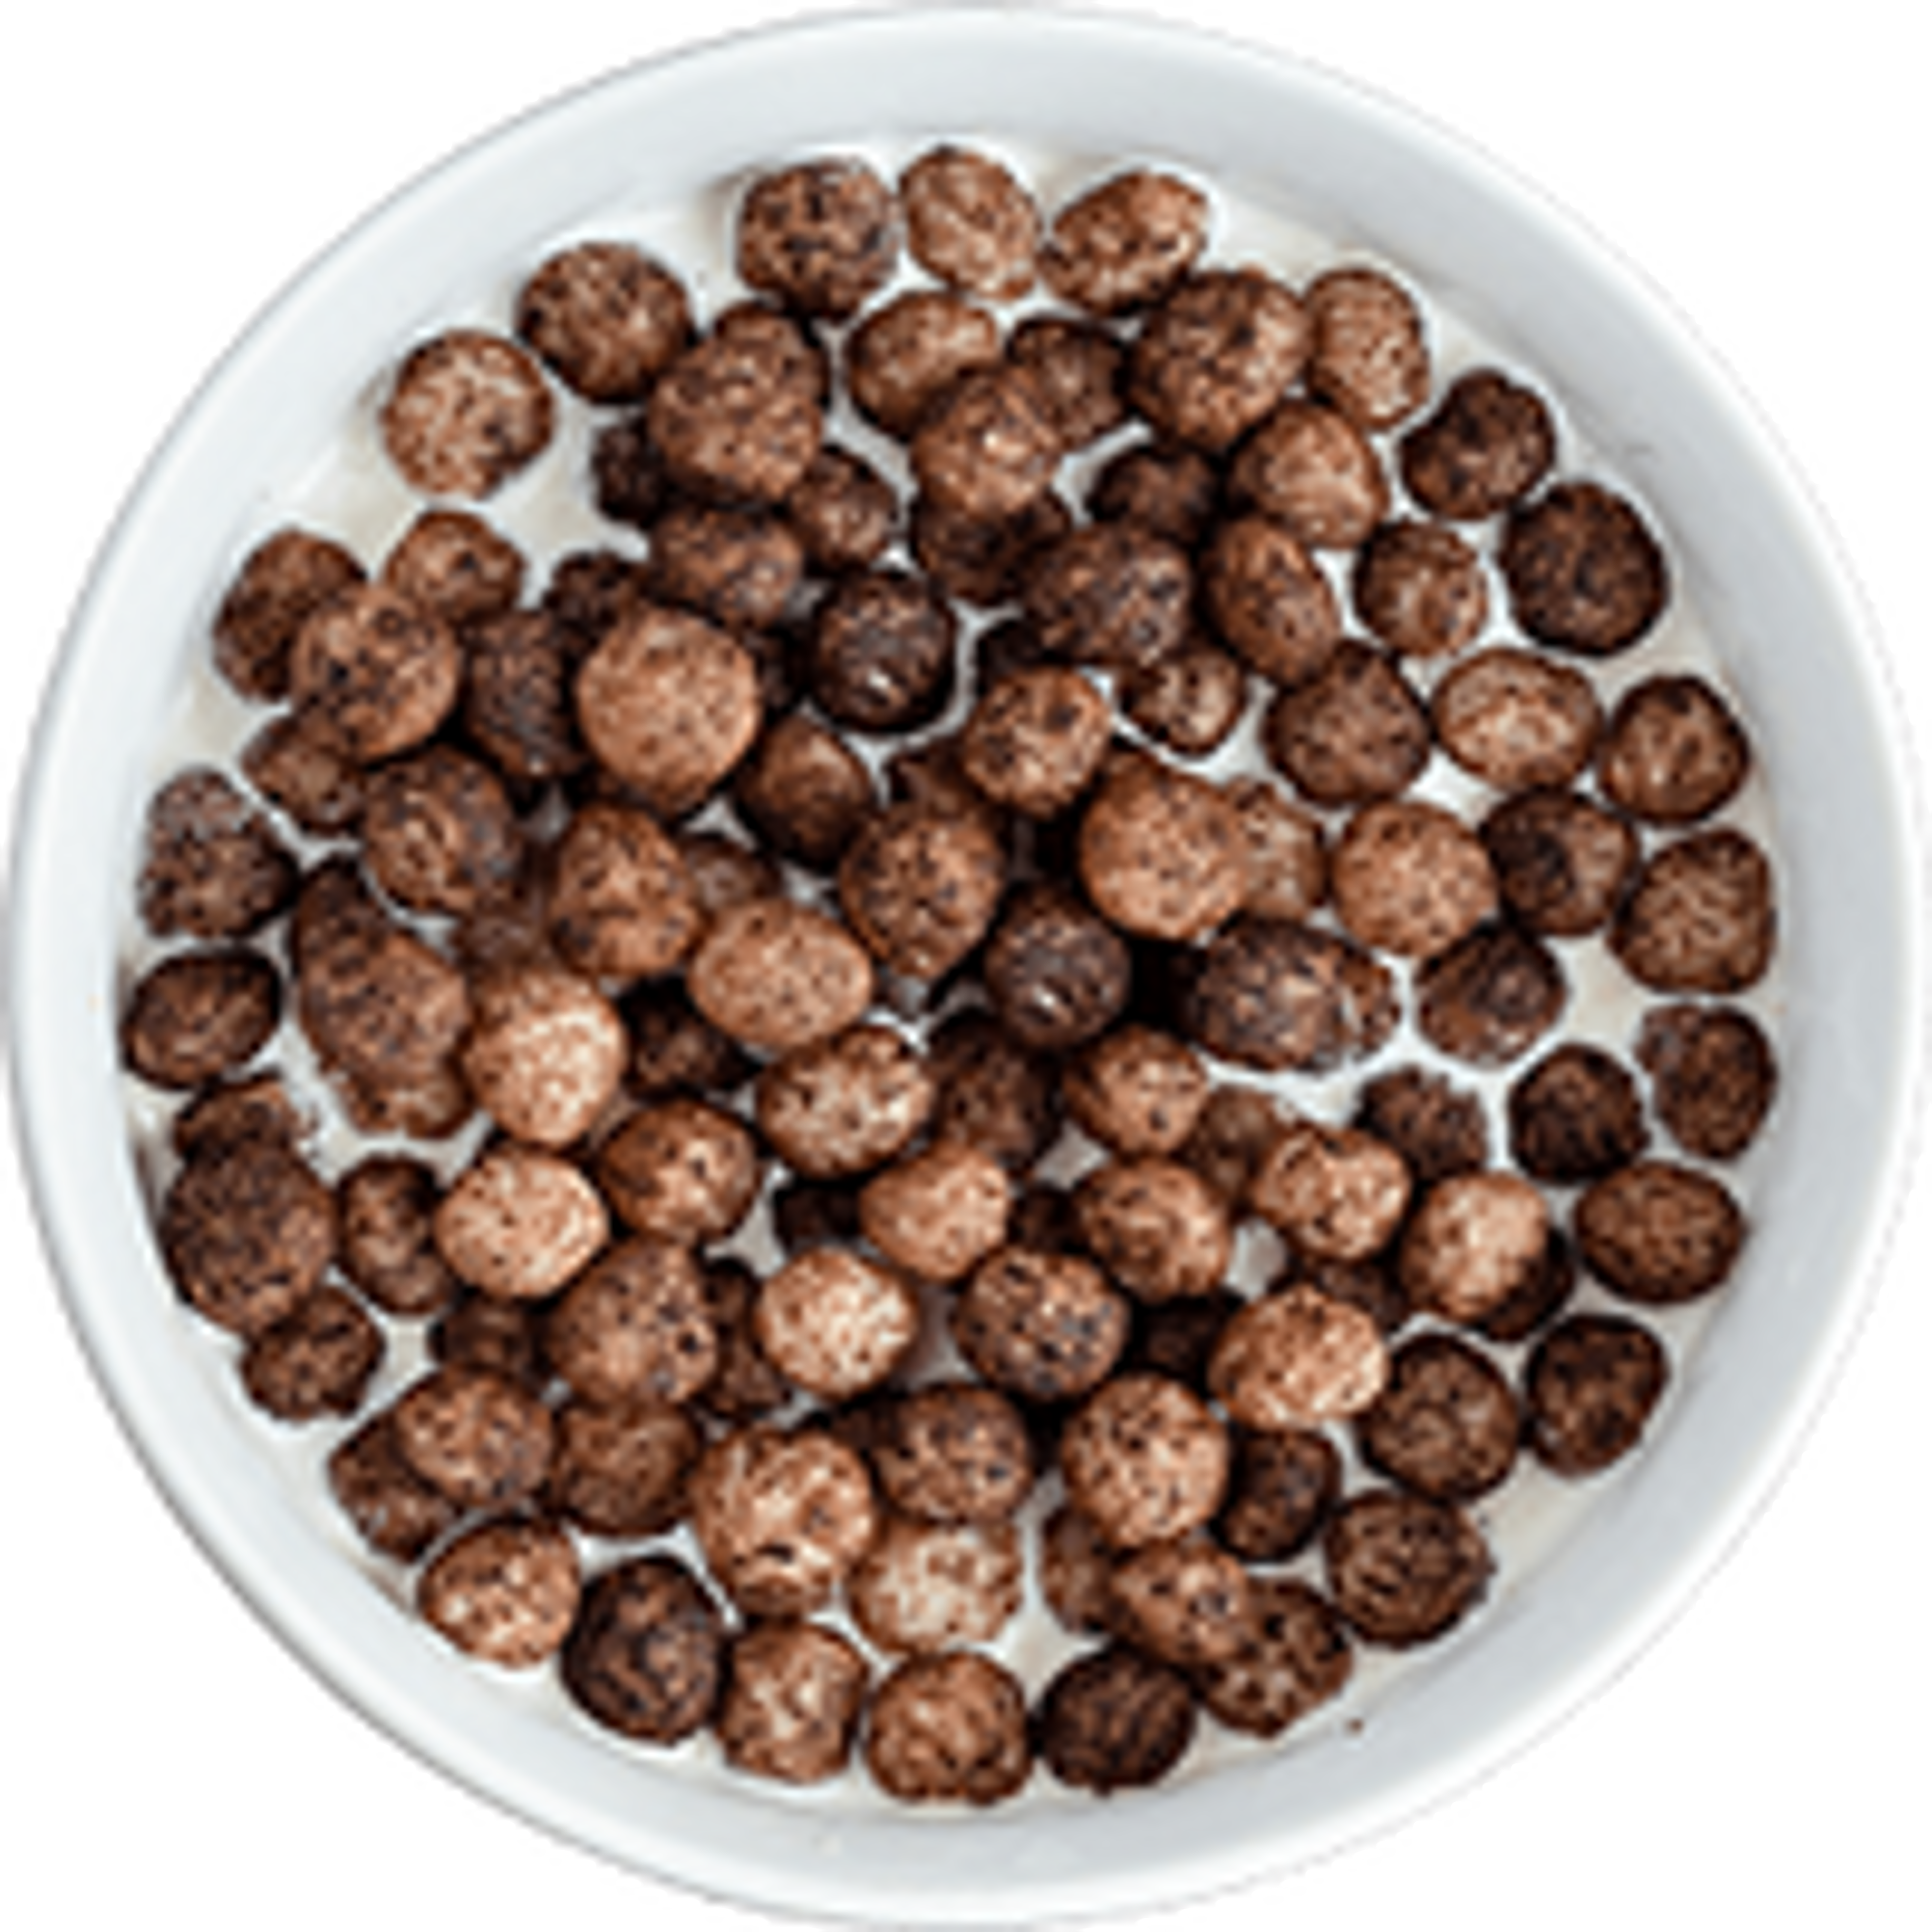 Keto Cereal (12 Bags)